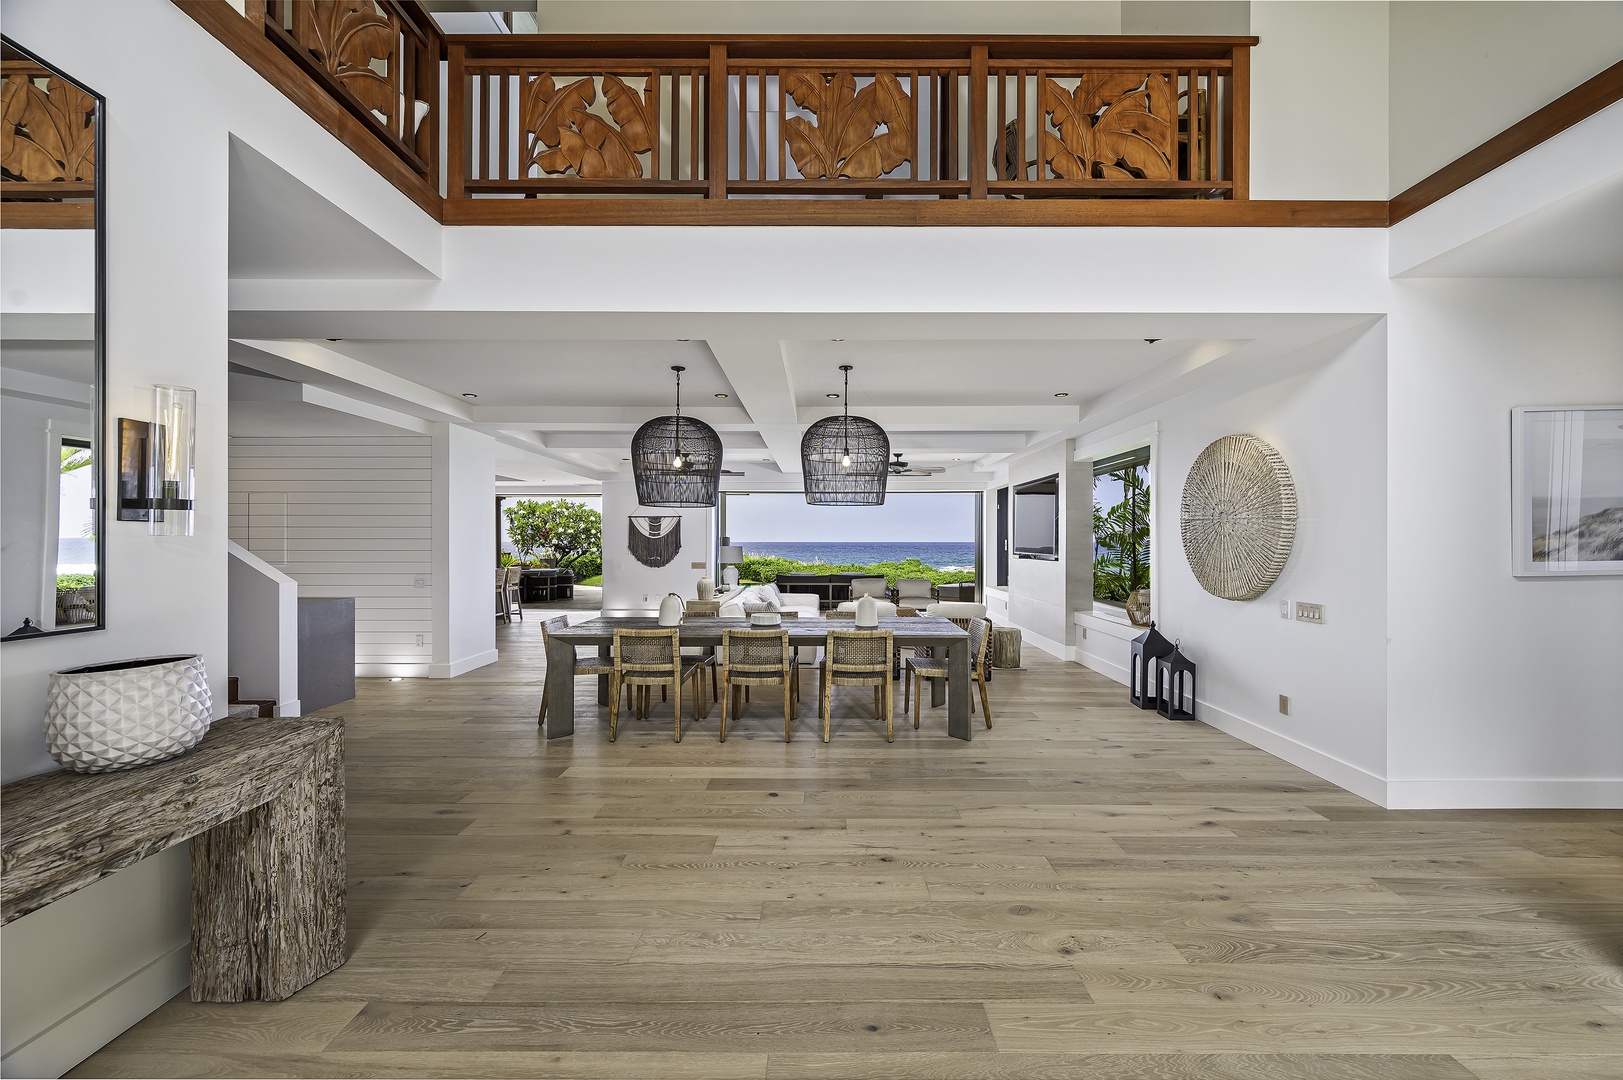 Kailua Kona Vacation Rentals, Alohi Kai Estate** - As you walk through the home you will be surrounded by top of the line Restoration Hardware furniture set in front of the turquoise water backdrop of the Pacific Ocean